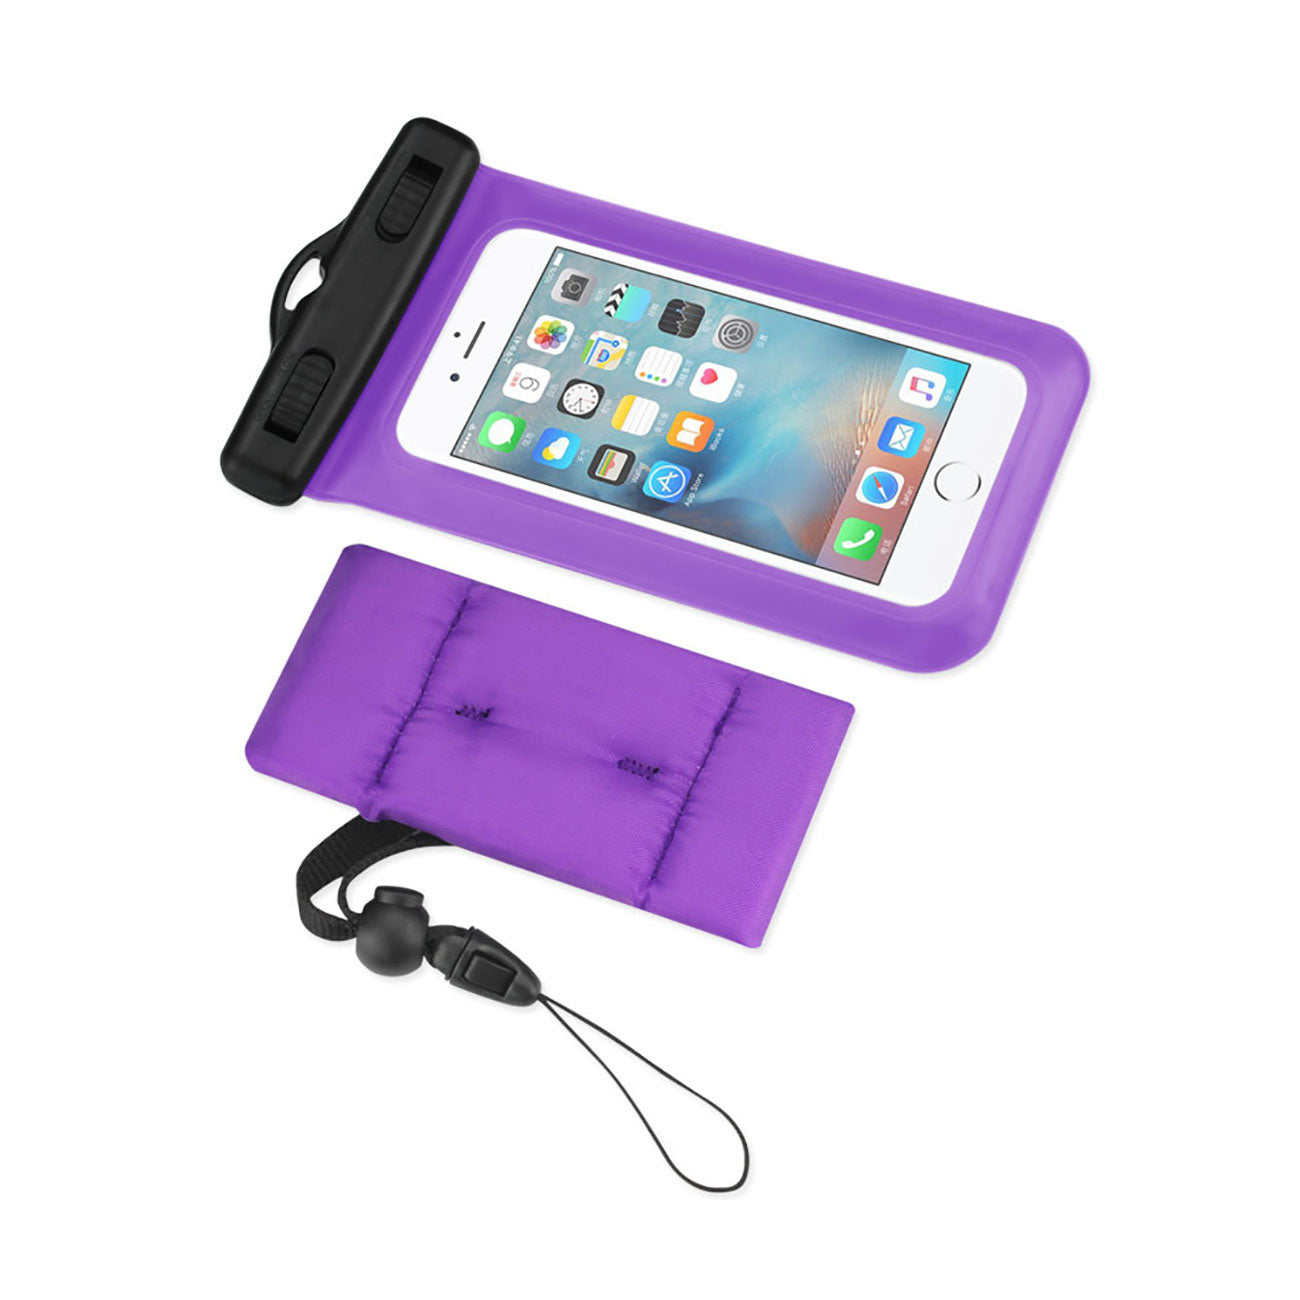 Waterproof Case With Touch Screen For 4.7X2.4X0.4 Inches Devices With Floating Adjustable Wrist Strap In Purple